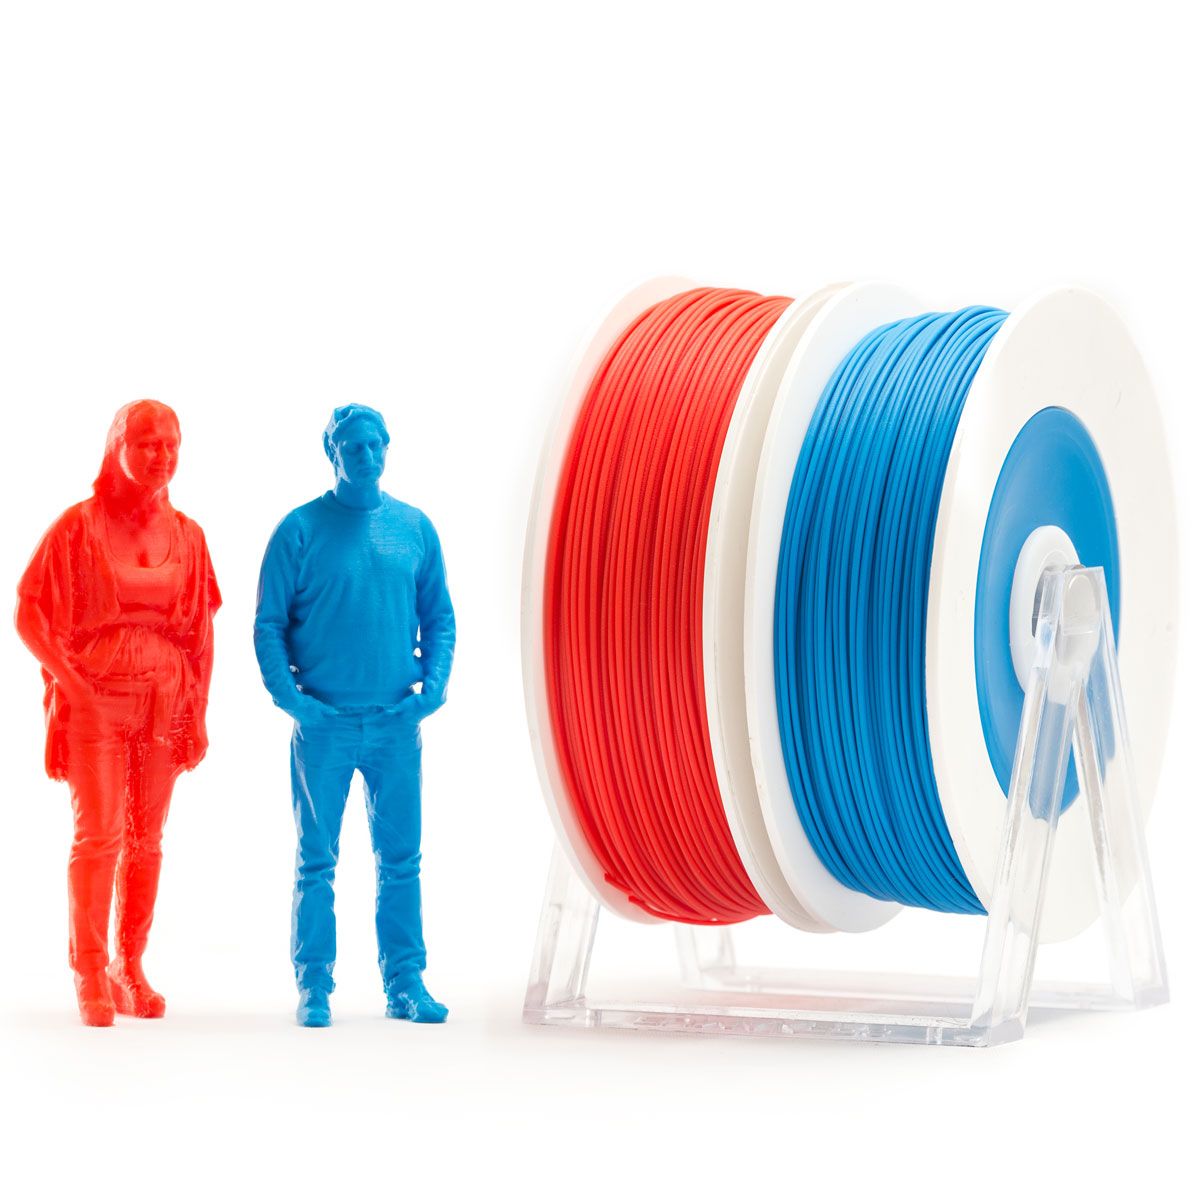 Pair of PLA spools: Red and Blue